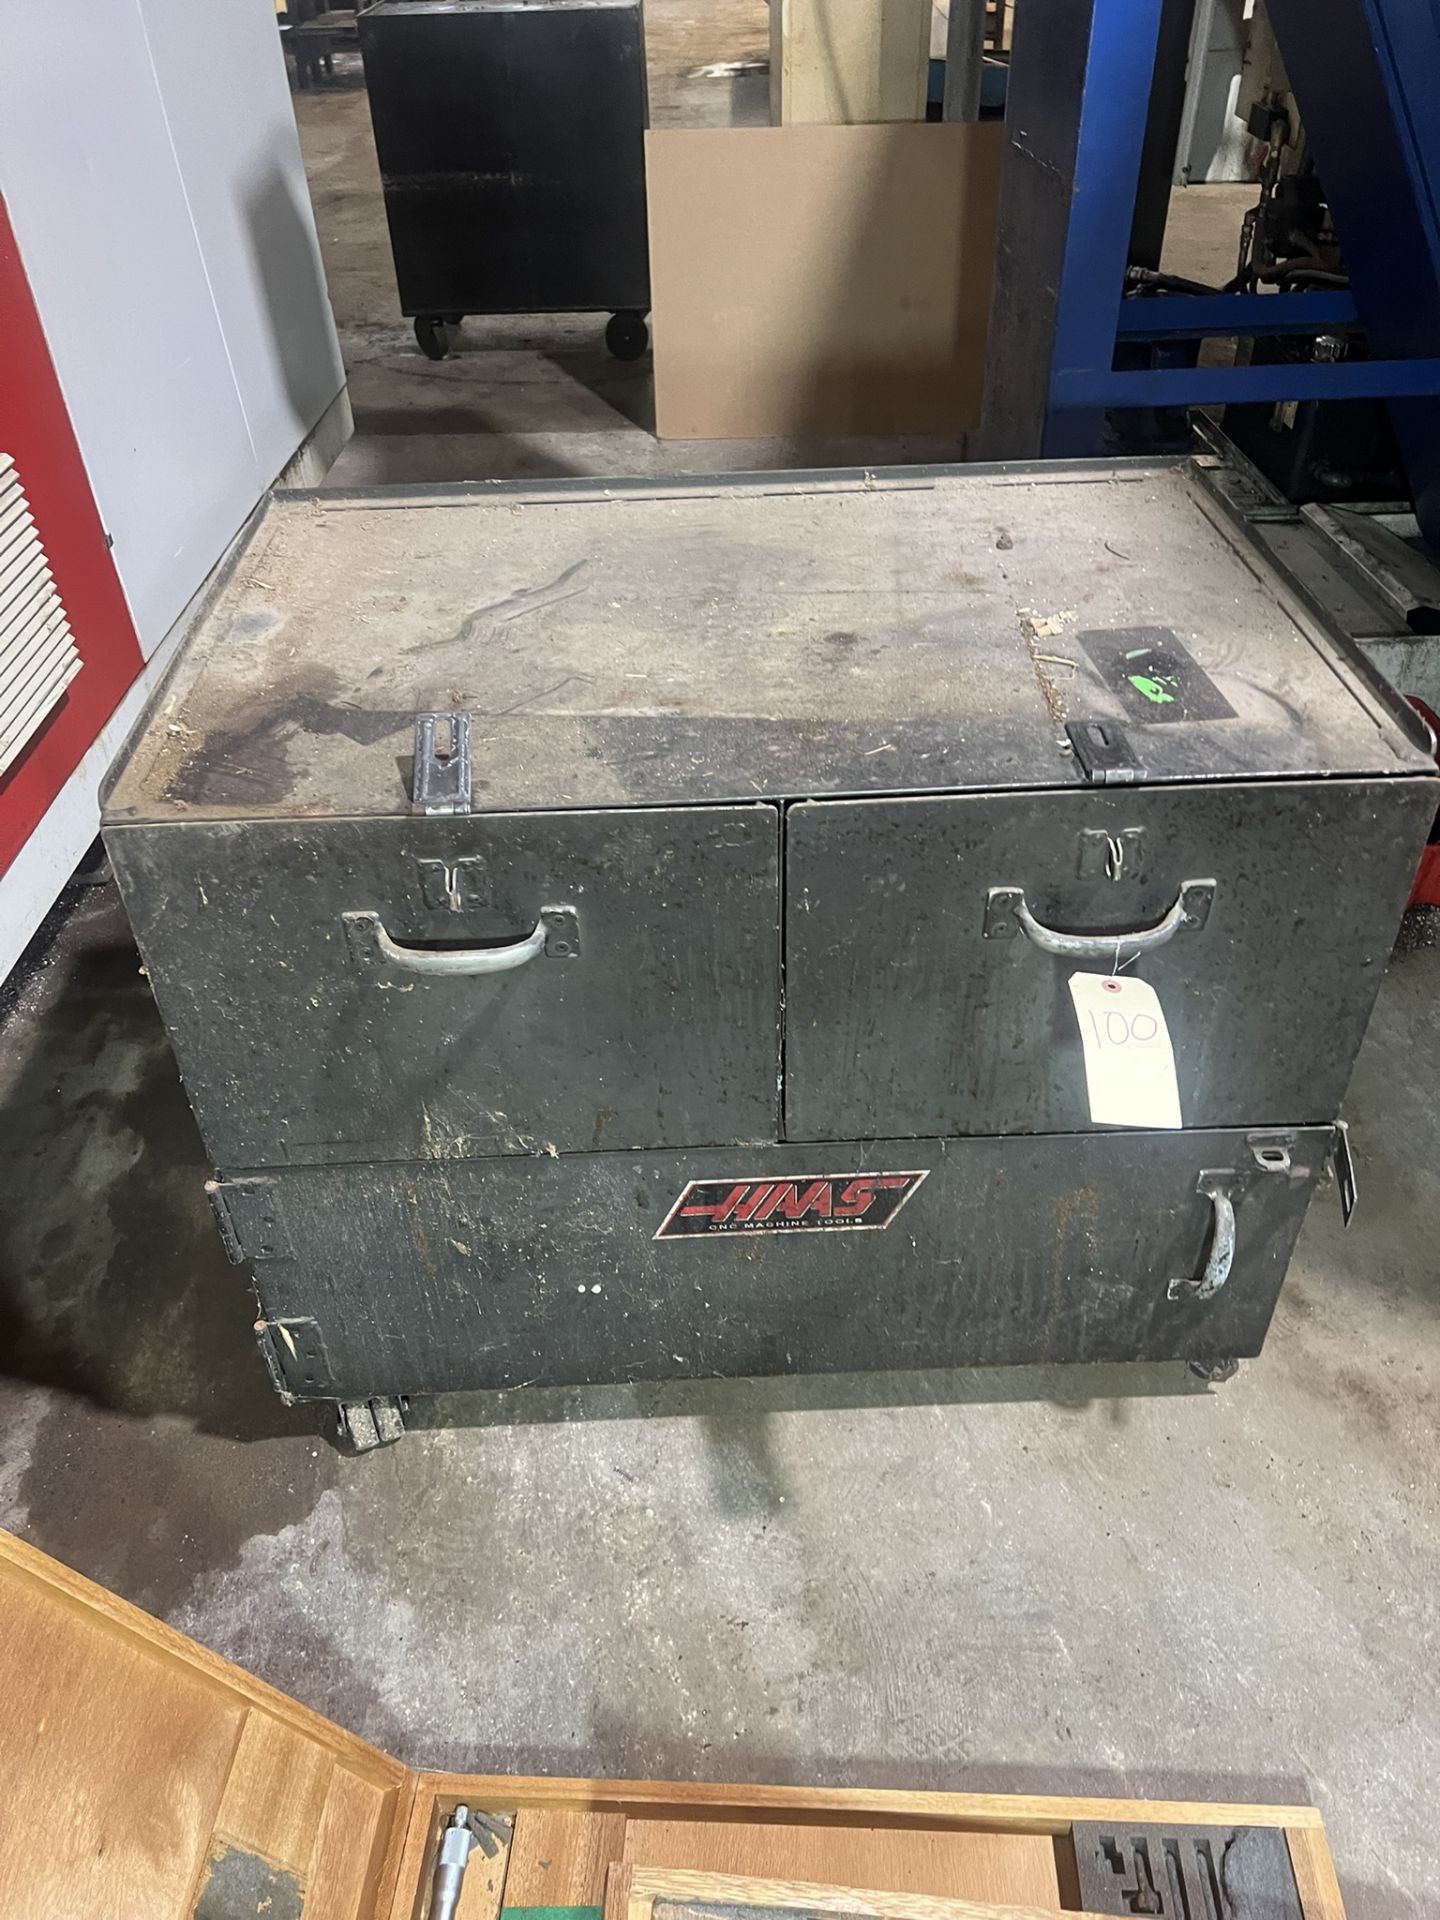 Haas Work Box on Casters